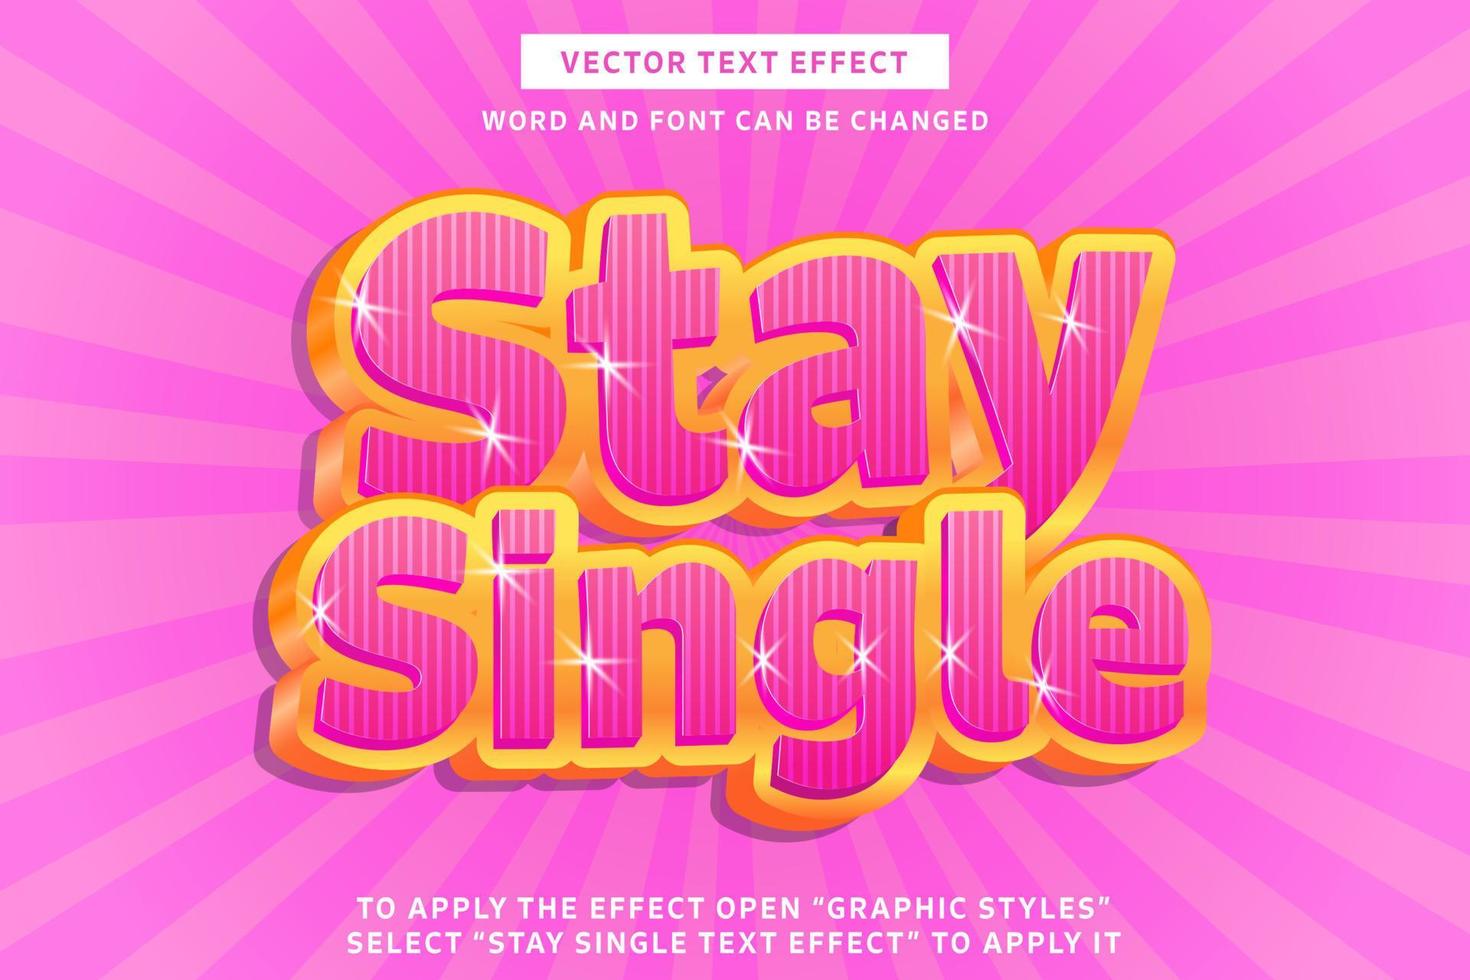 Stay Single, text effect fully editable with pink and gold color vector